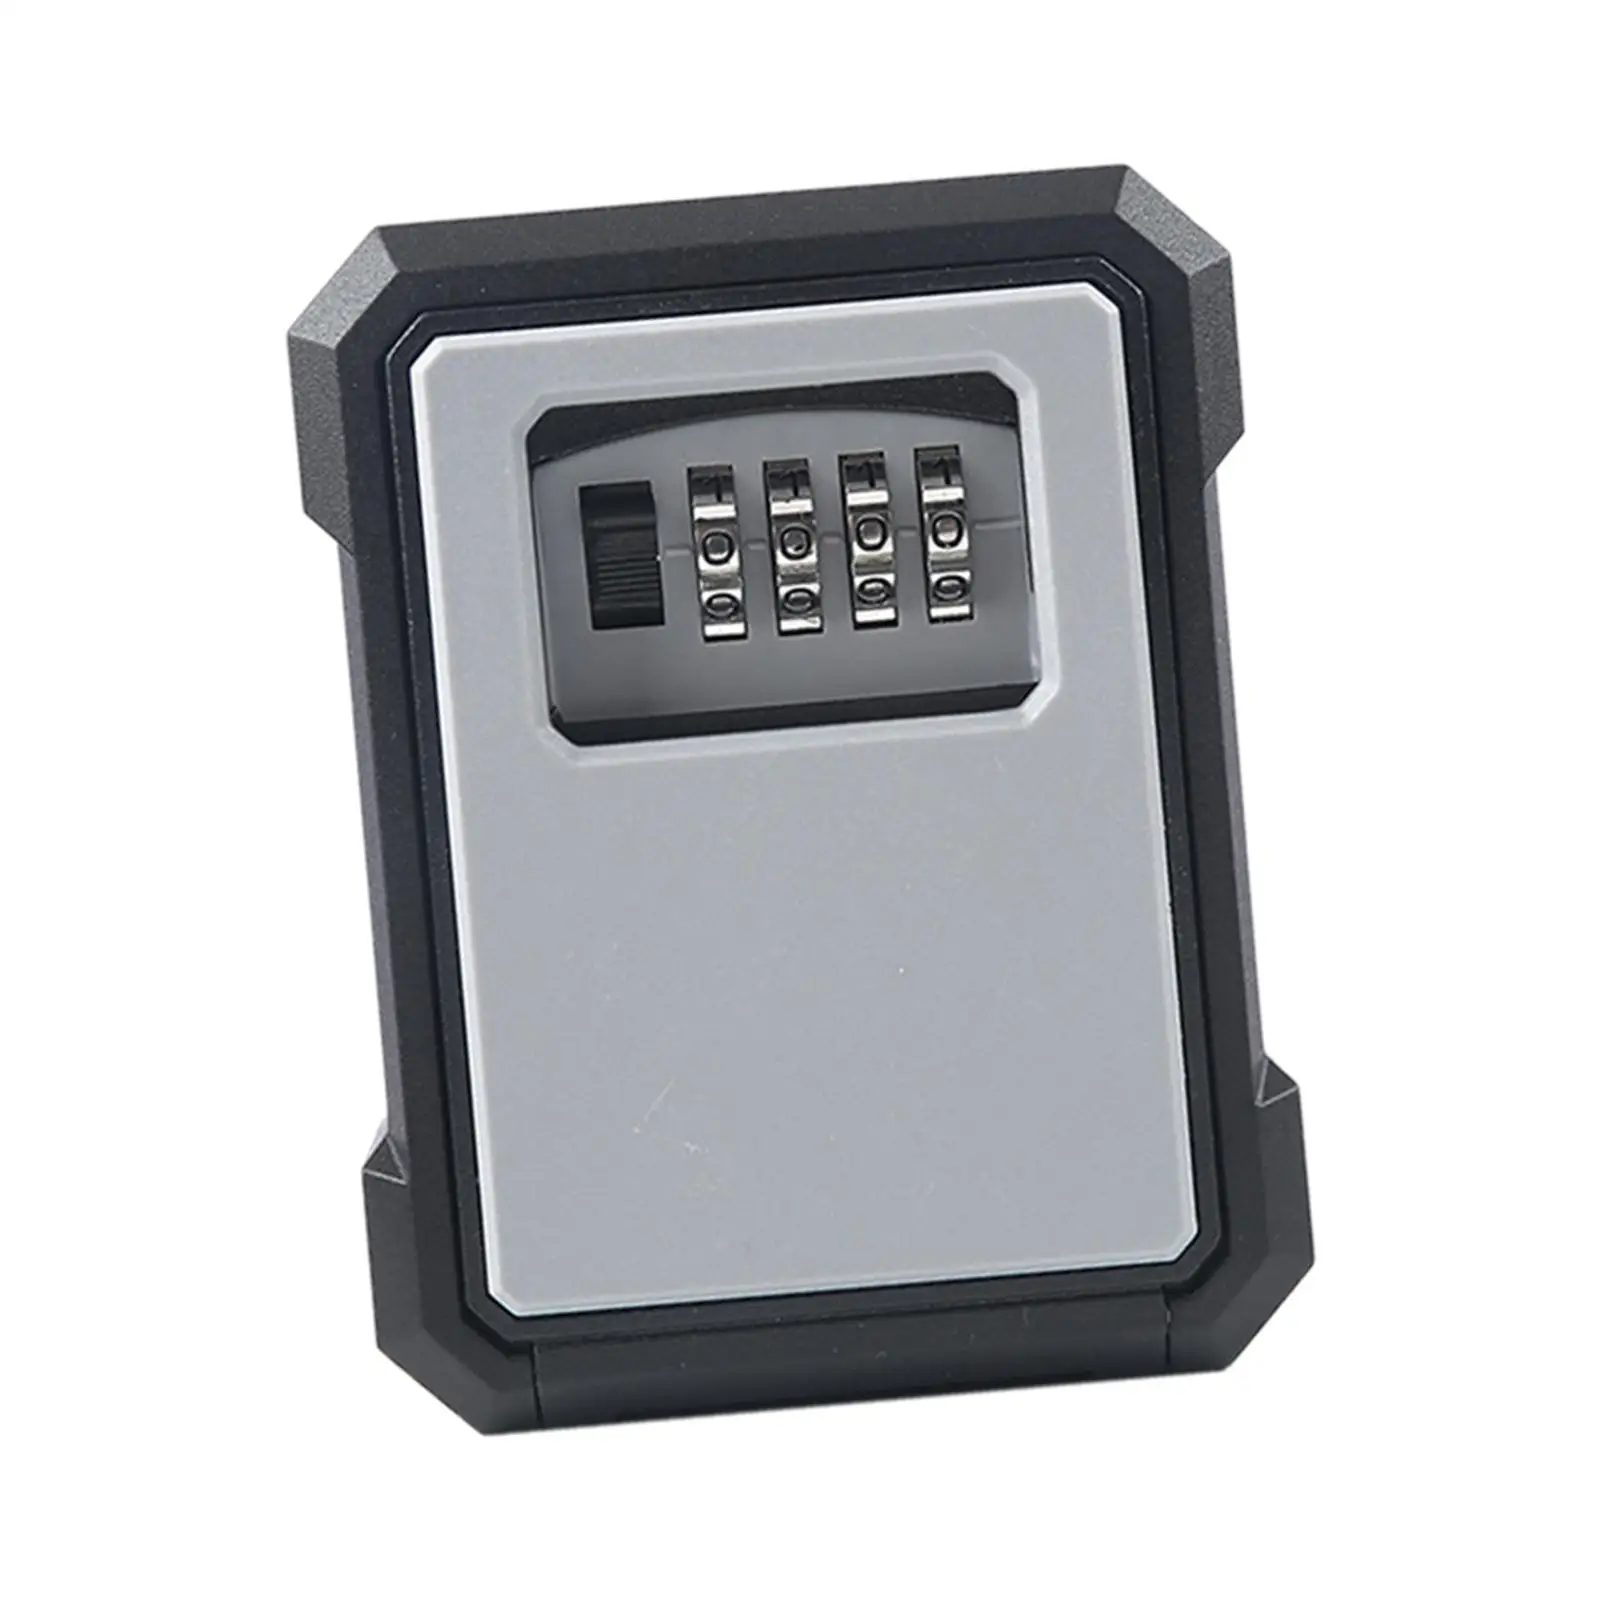 Outdoor Key Storage Lock Box Combination Key Storage Lock Box Wall Mount Password Key Storage Case for Store Supplies